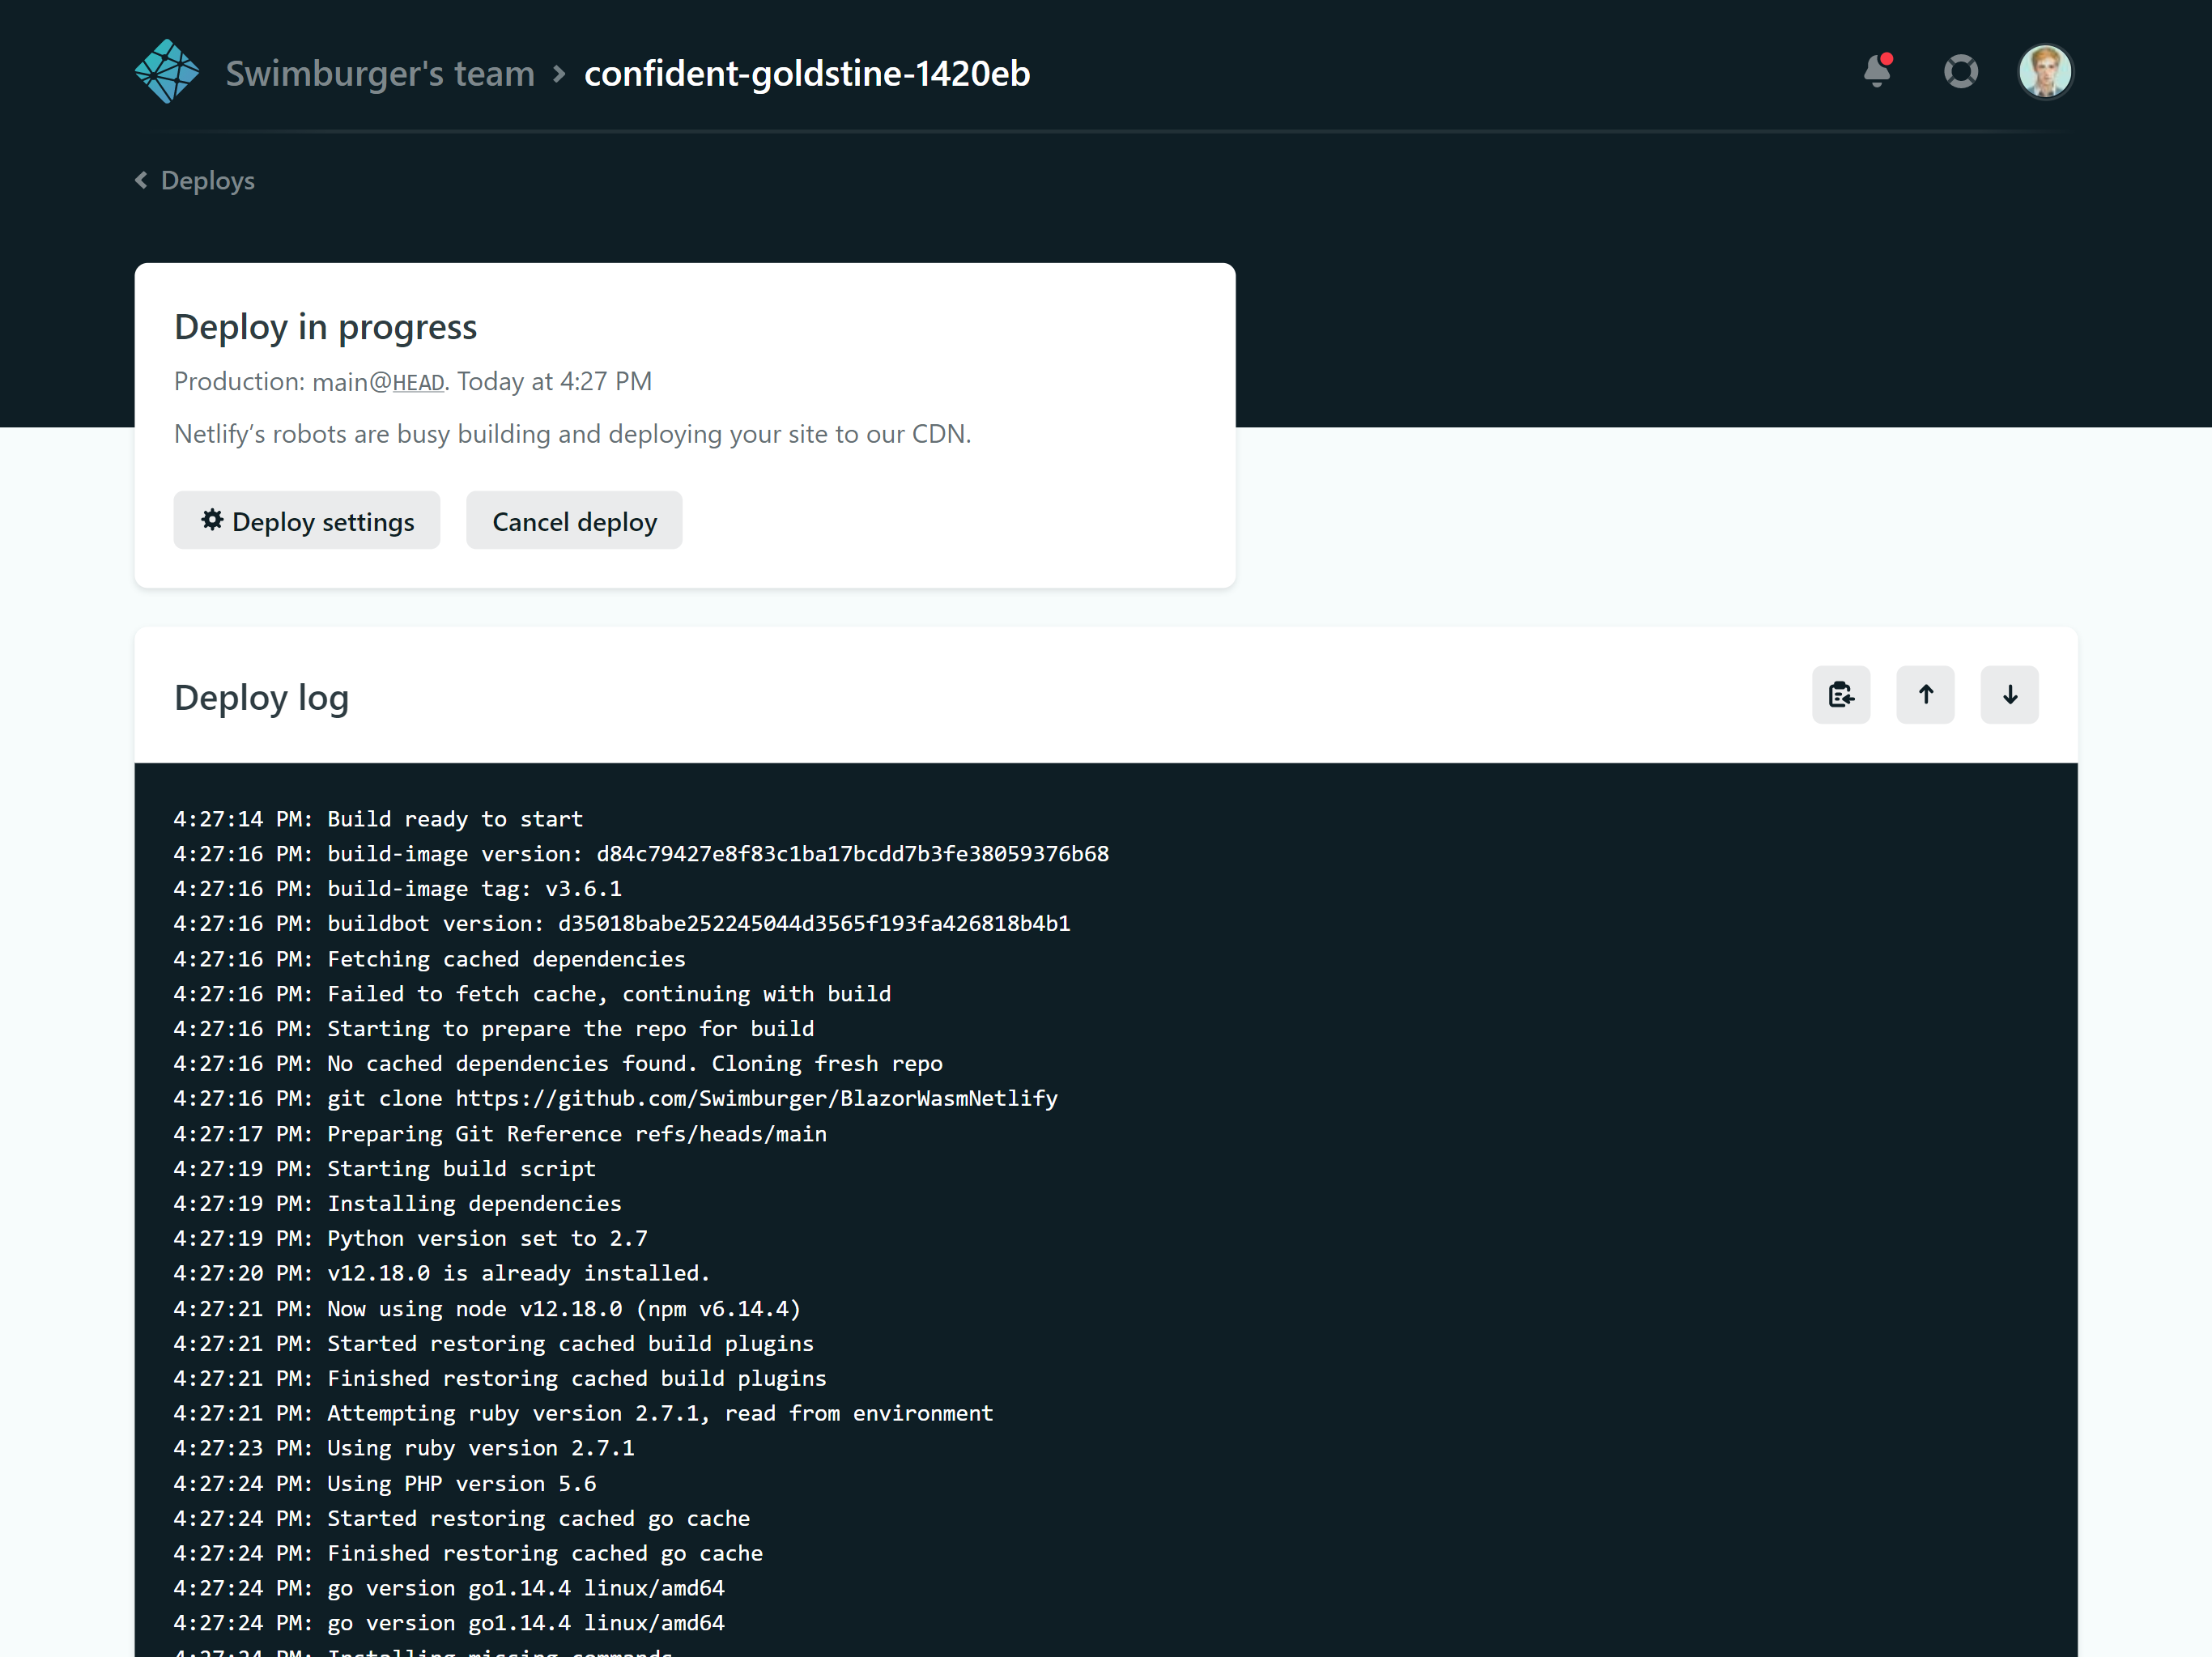 Screenshot of the real-time deployment page of Netlify. The page shows a bunch of logs for the deployment process.